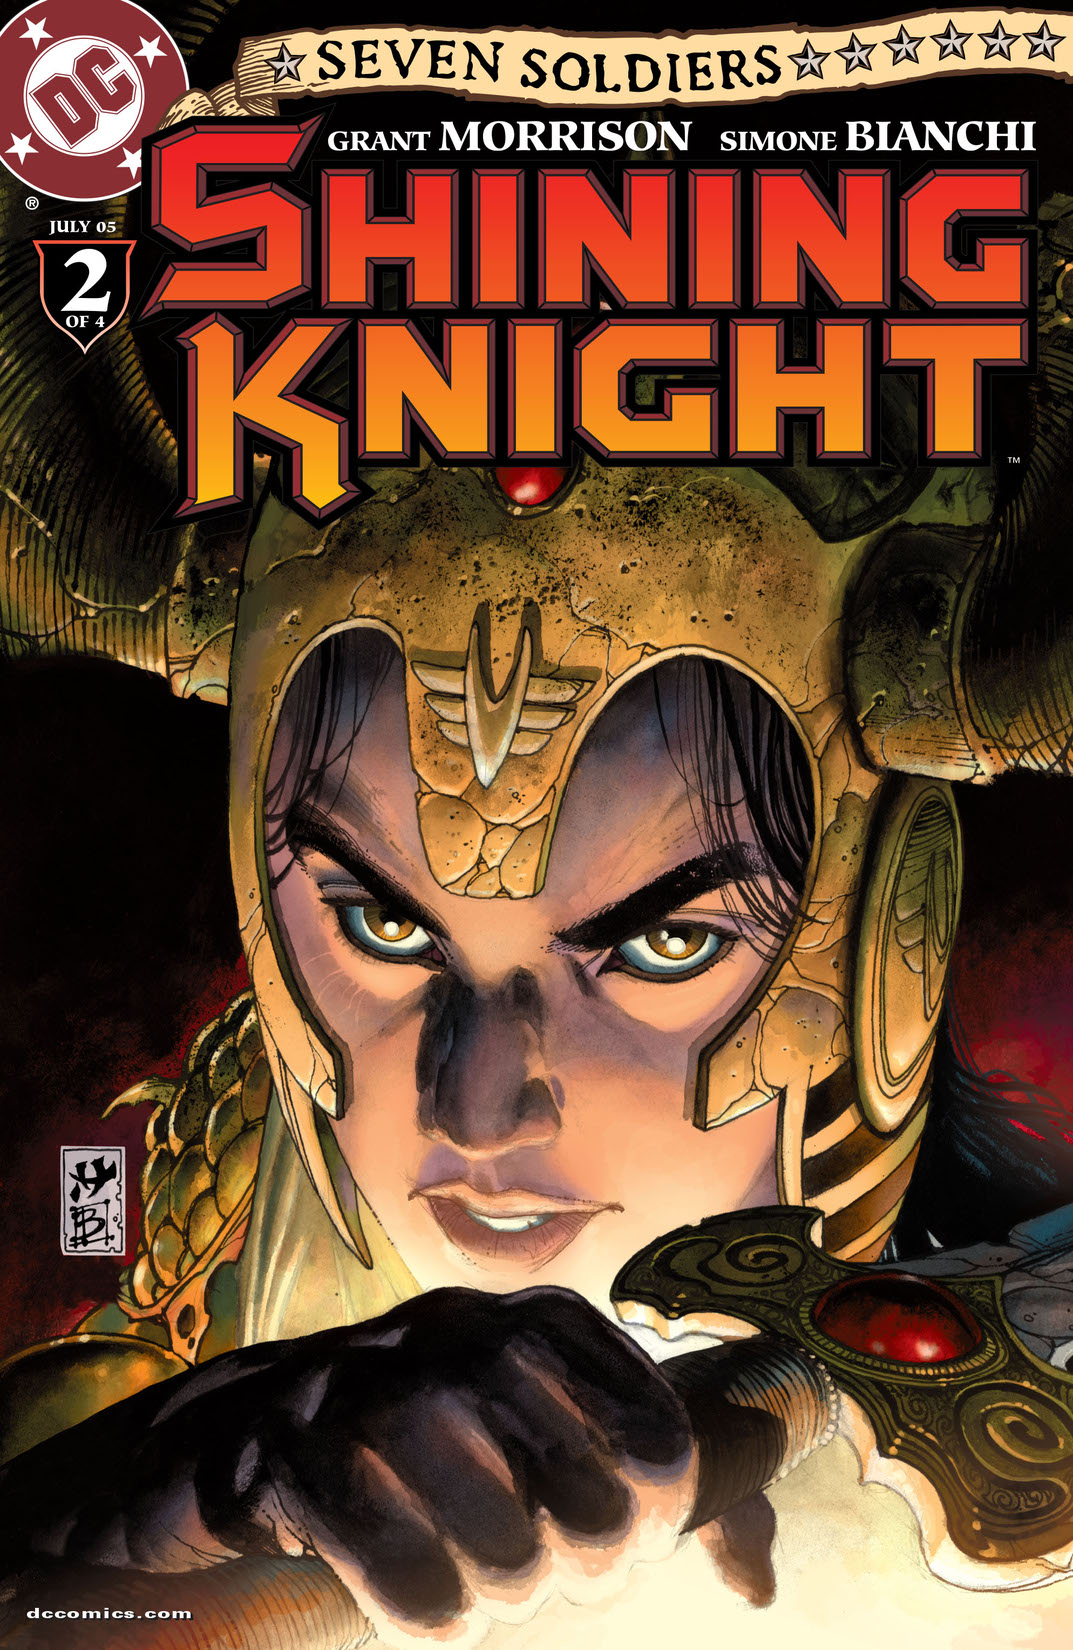 Seven Soldiers: Shining Knight #2 preview images